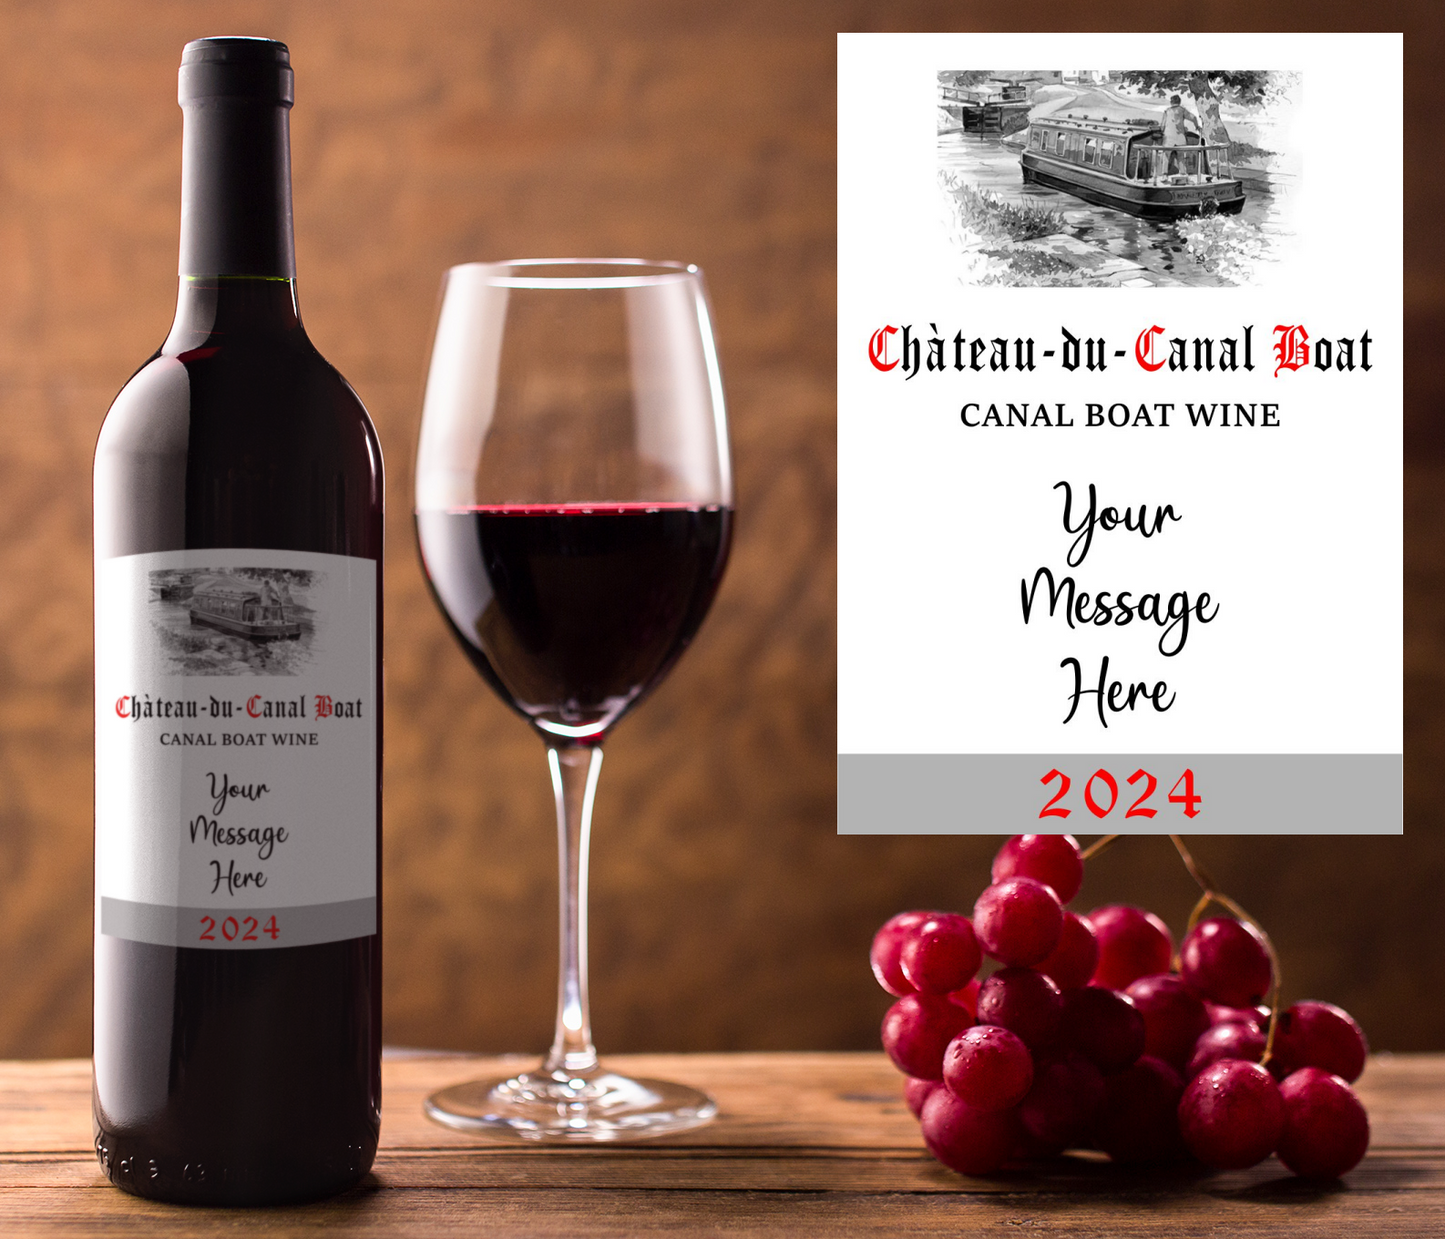 Boating Wine Bottle Label x2 - Chateau du Canal Boat - Personalise Year & Message - To fit Most Alcohol Bottles Custom Gift